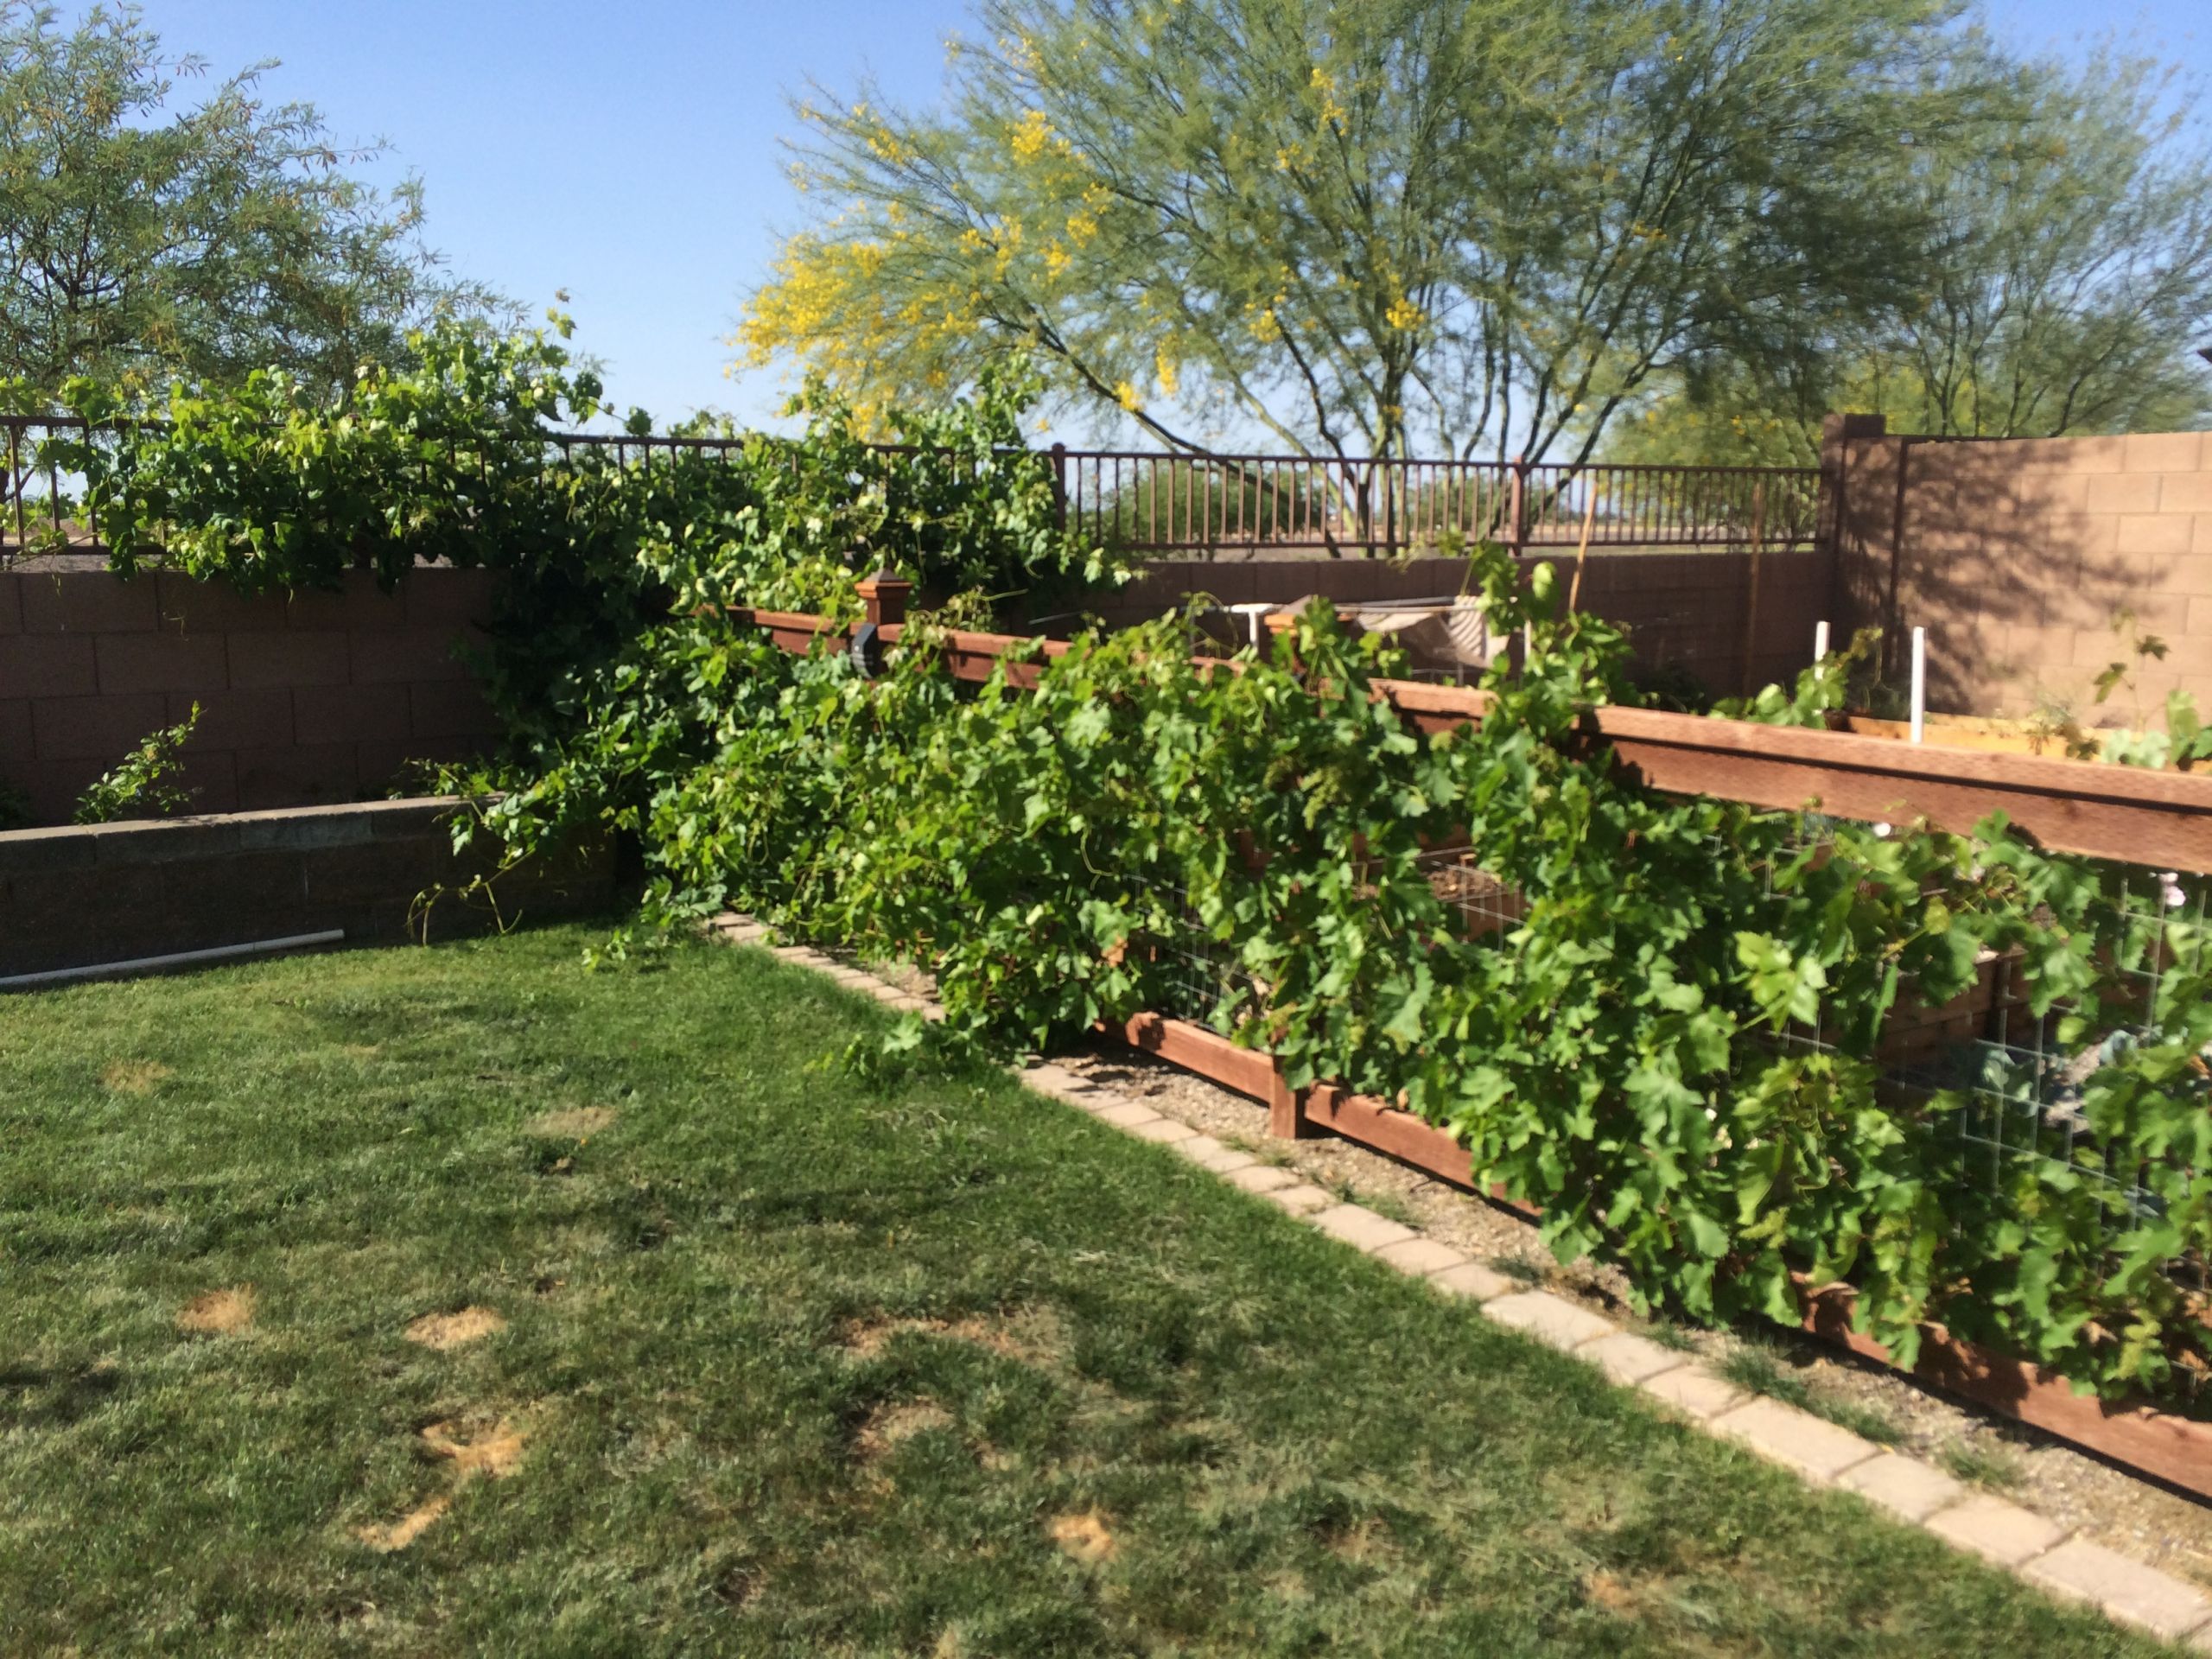 Growing Grapes In Backyard
 Five Tips for Growing Grapes in Phoenix